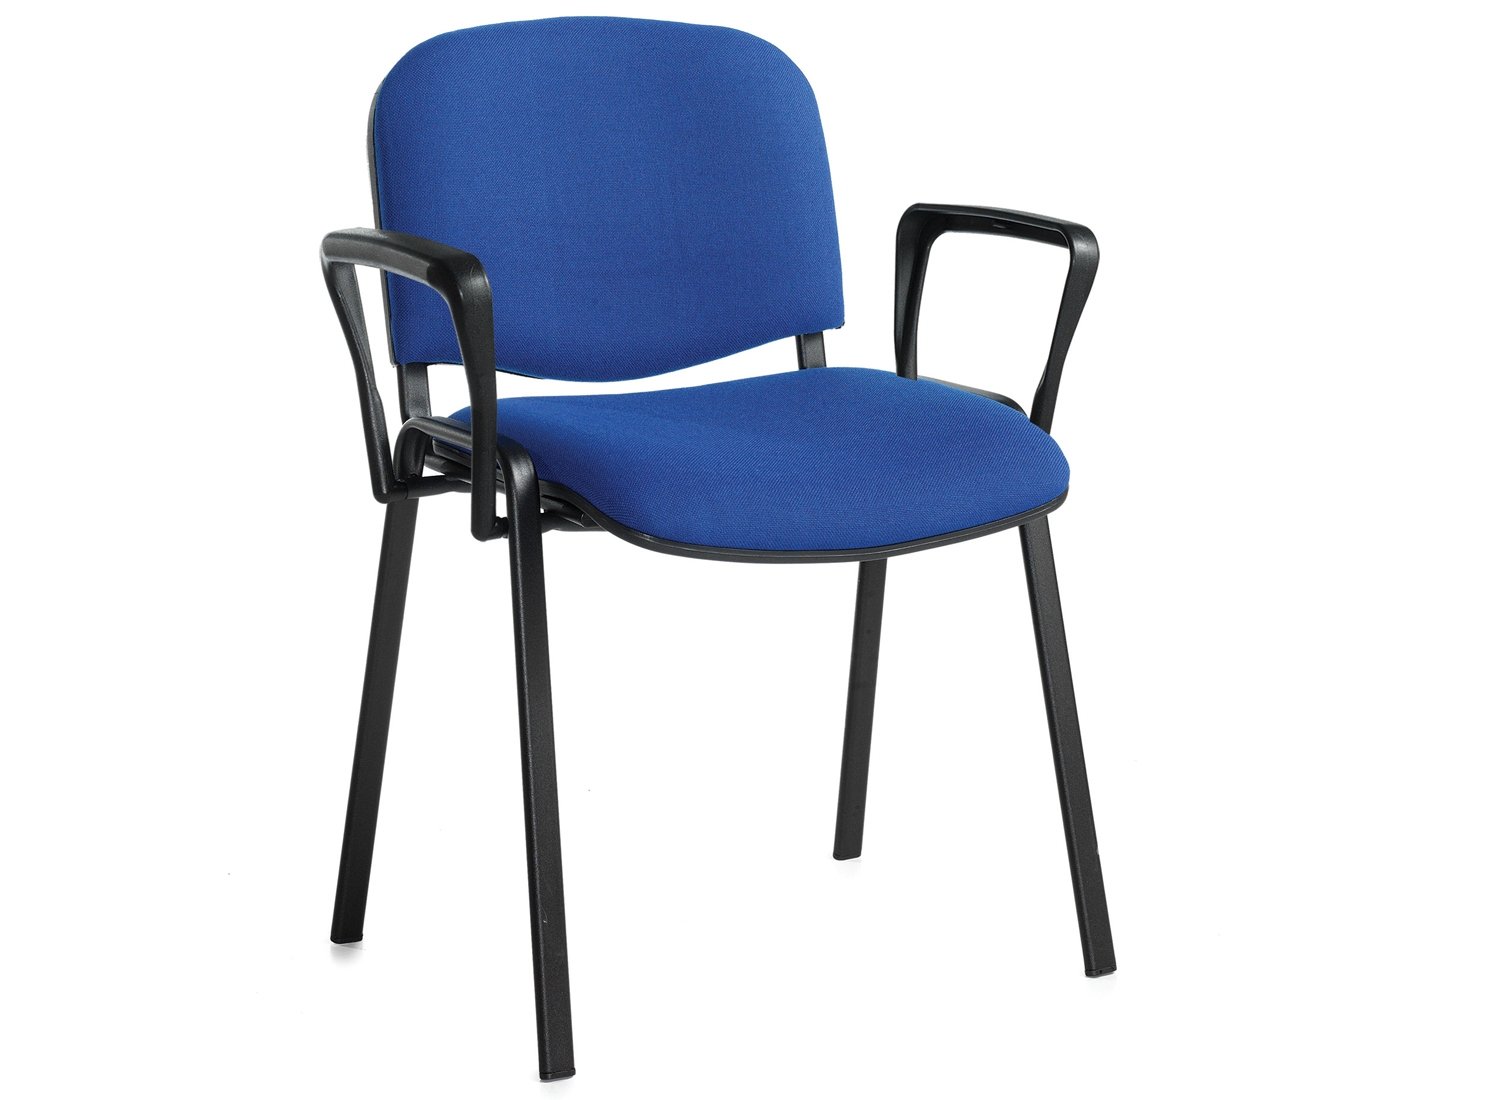 Pack Of 4 Black Frame Conference Office Chairs With Arms, Blue, Fully Installed